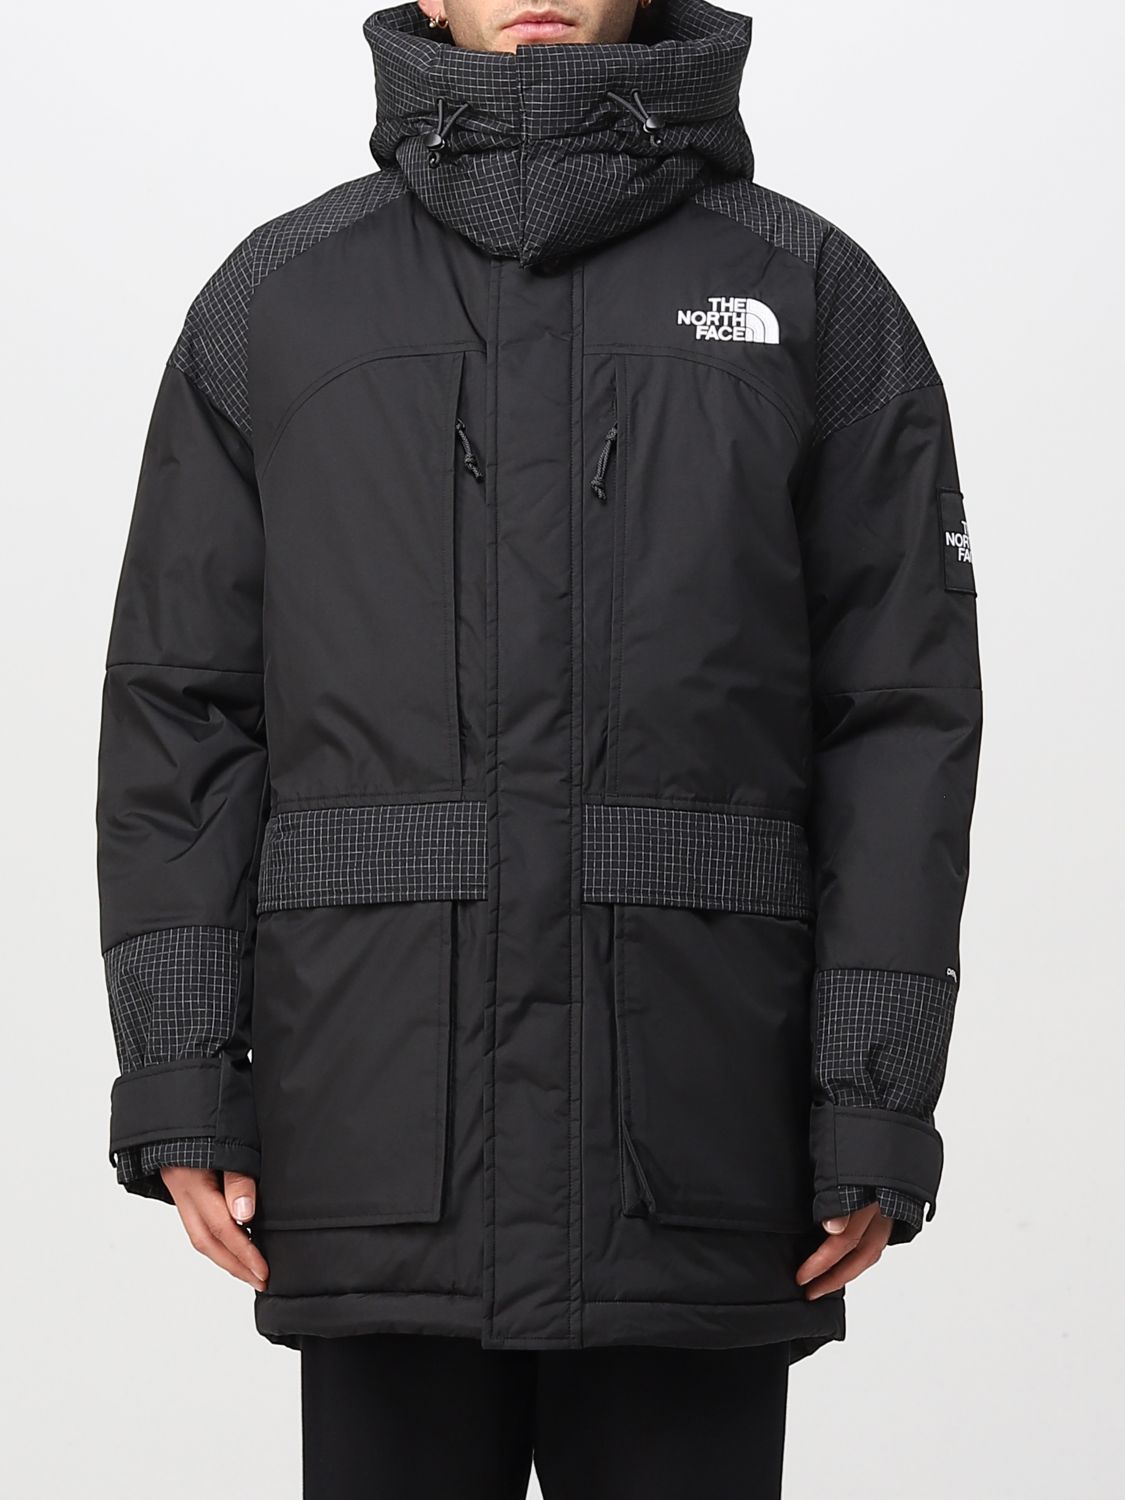 Hoofd elf Archeologie THE NORTH FACE: jacket for man - Black | The North Face jacket NF0A7X2Y  online on GIGLIO.COM